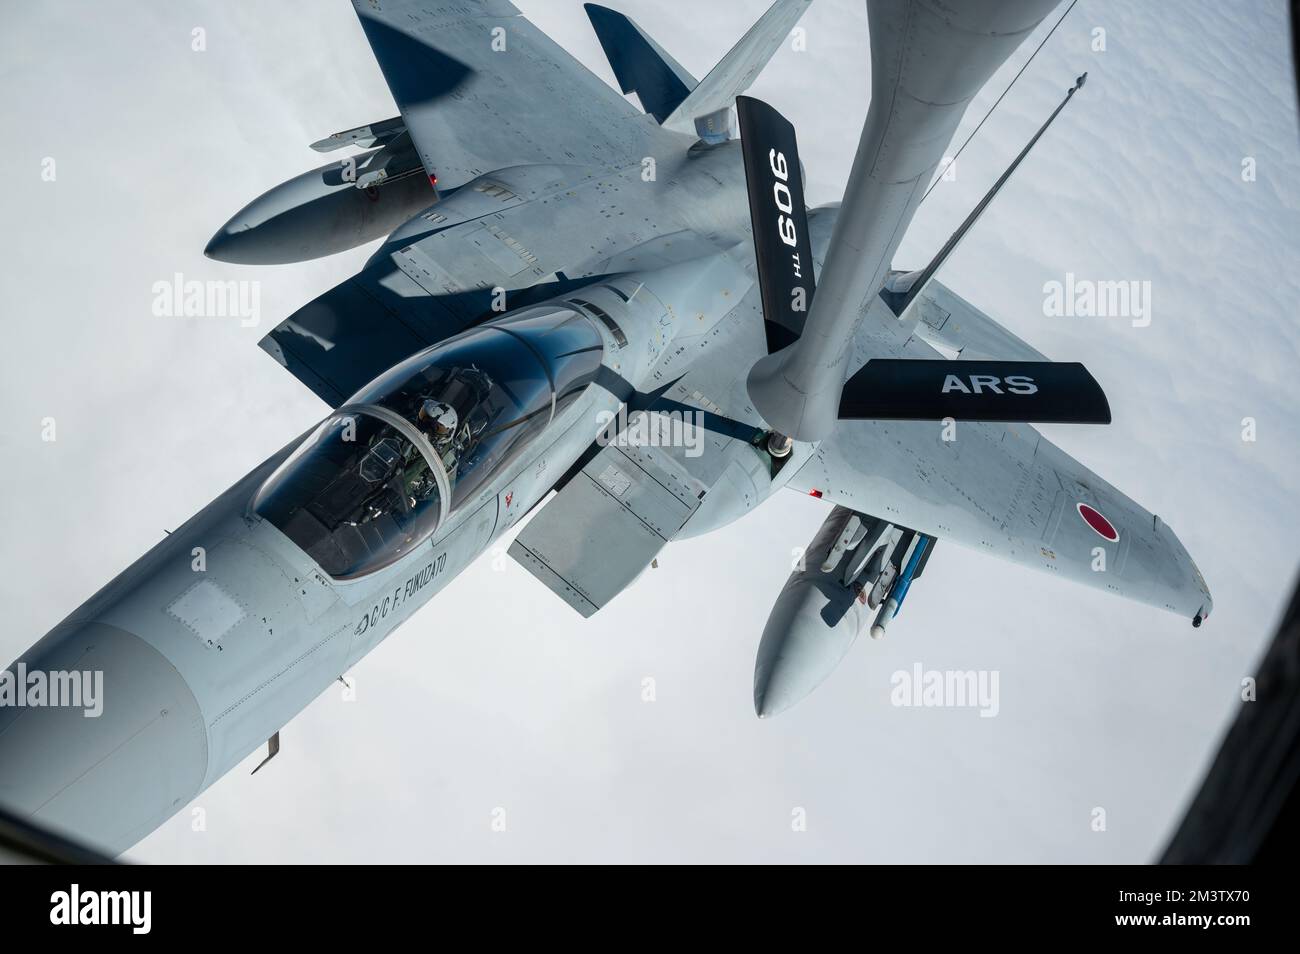 A Japan Air Self-Defense Force F-15J Eagle receives fuel from a U.S. Air Force KC-135 Stratotanker assigned to the 909th Air Refueling Squadron over the Pacific Ocean, Dec. 14, 2022. Shared security and stability depends on strong, capable networks of Alliances and partnerships. (U.S. Air Force photo by Senior Airman Yosselin Campos) Stock Photo